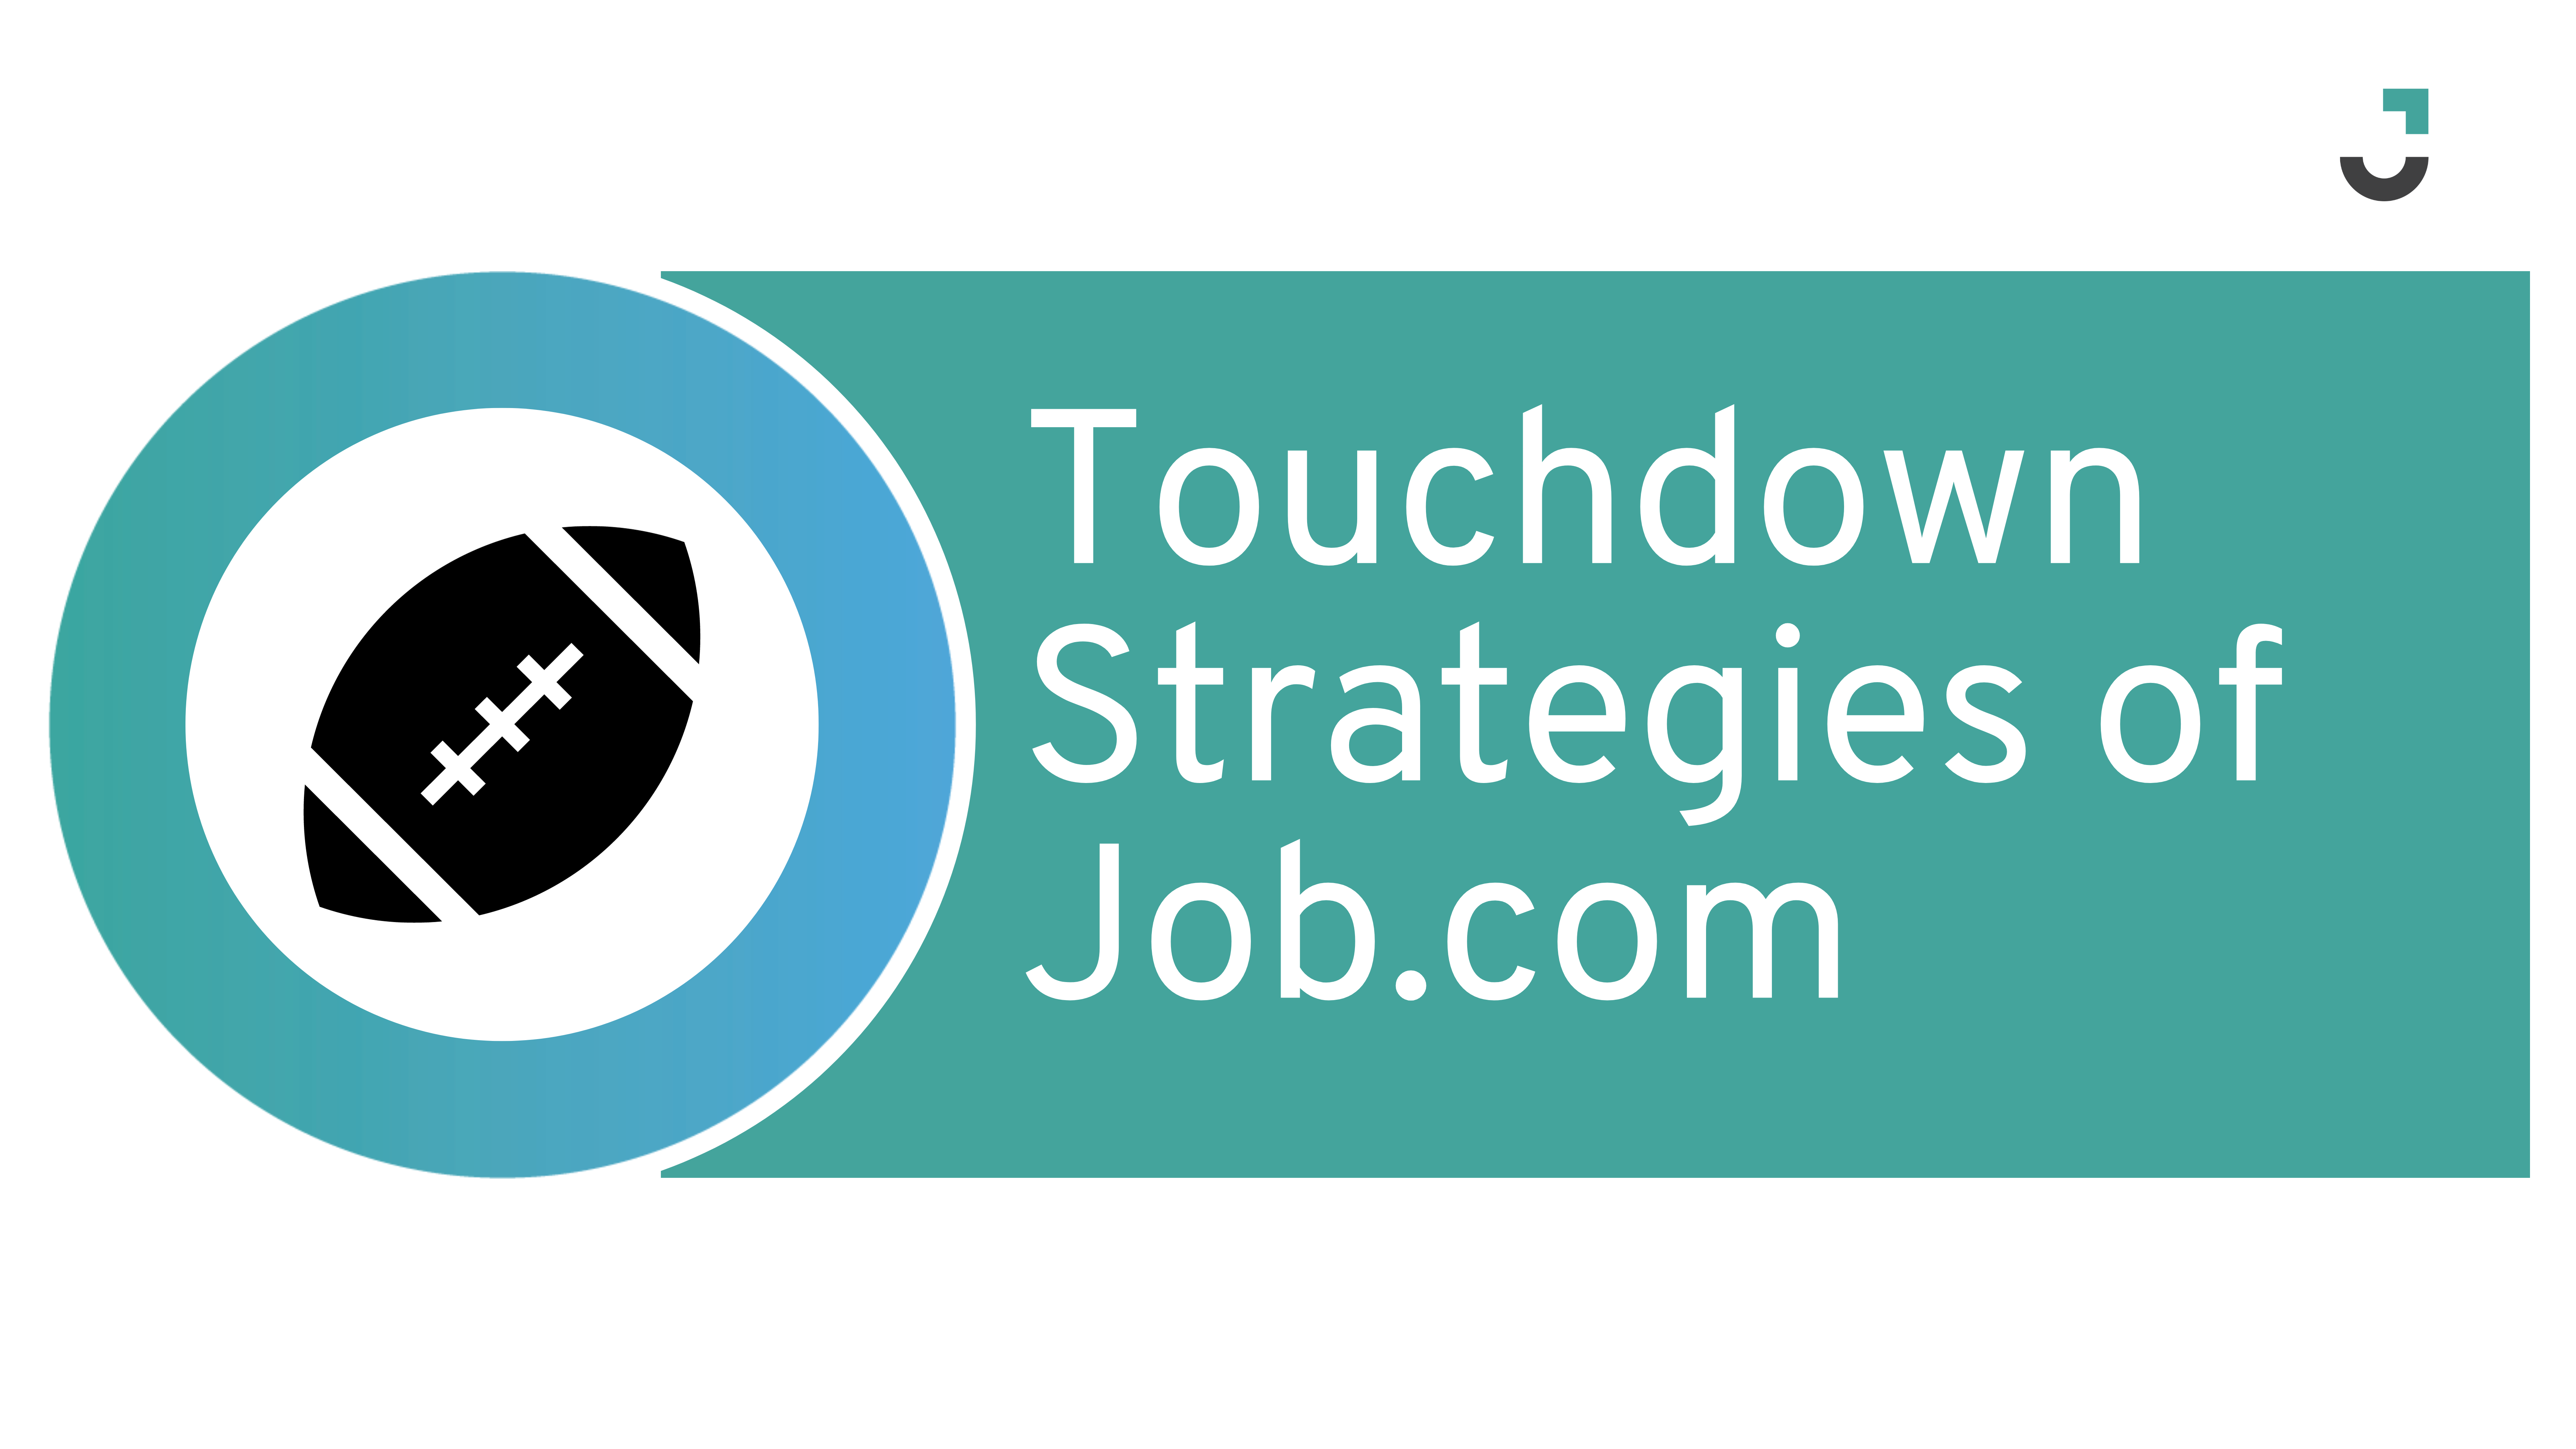 From Endzones to Inboxes: The Touchdown Strategies of Job.com